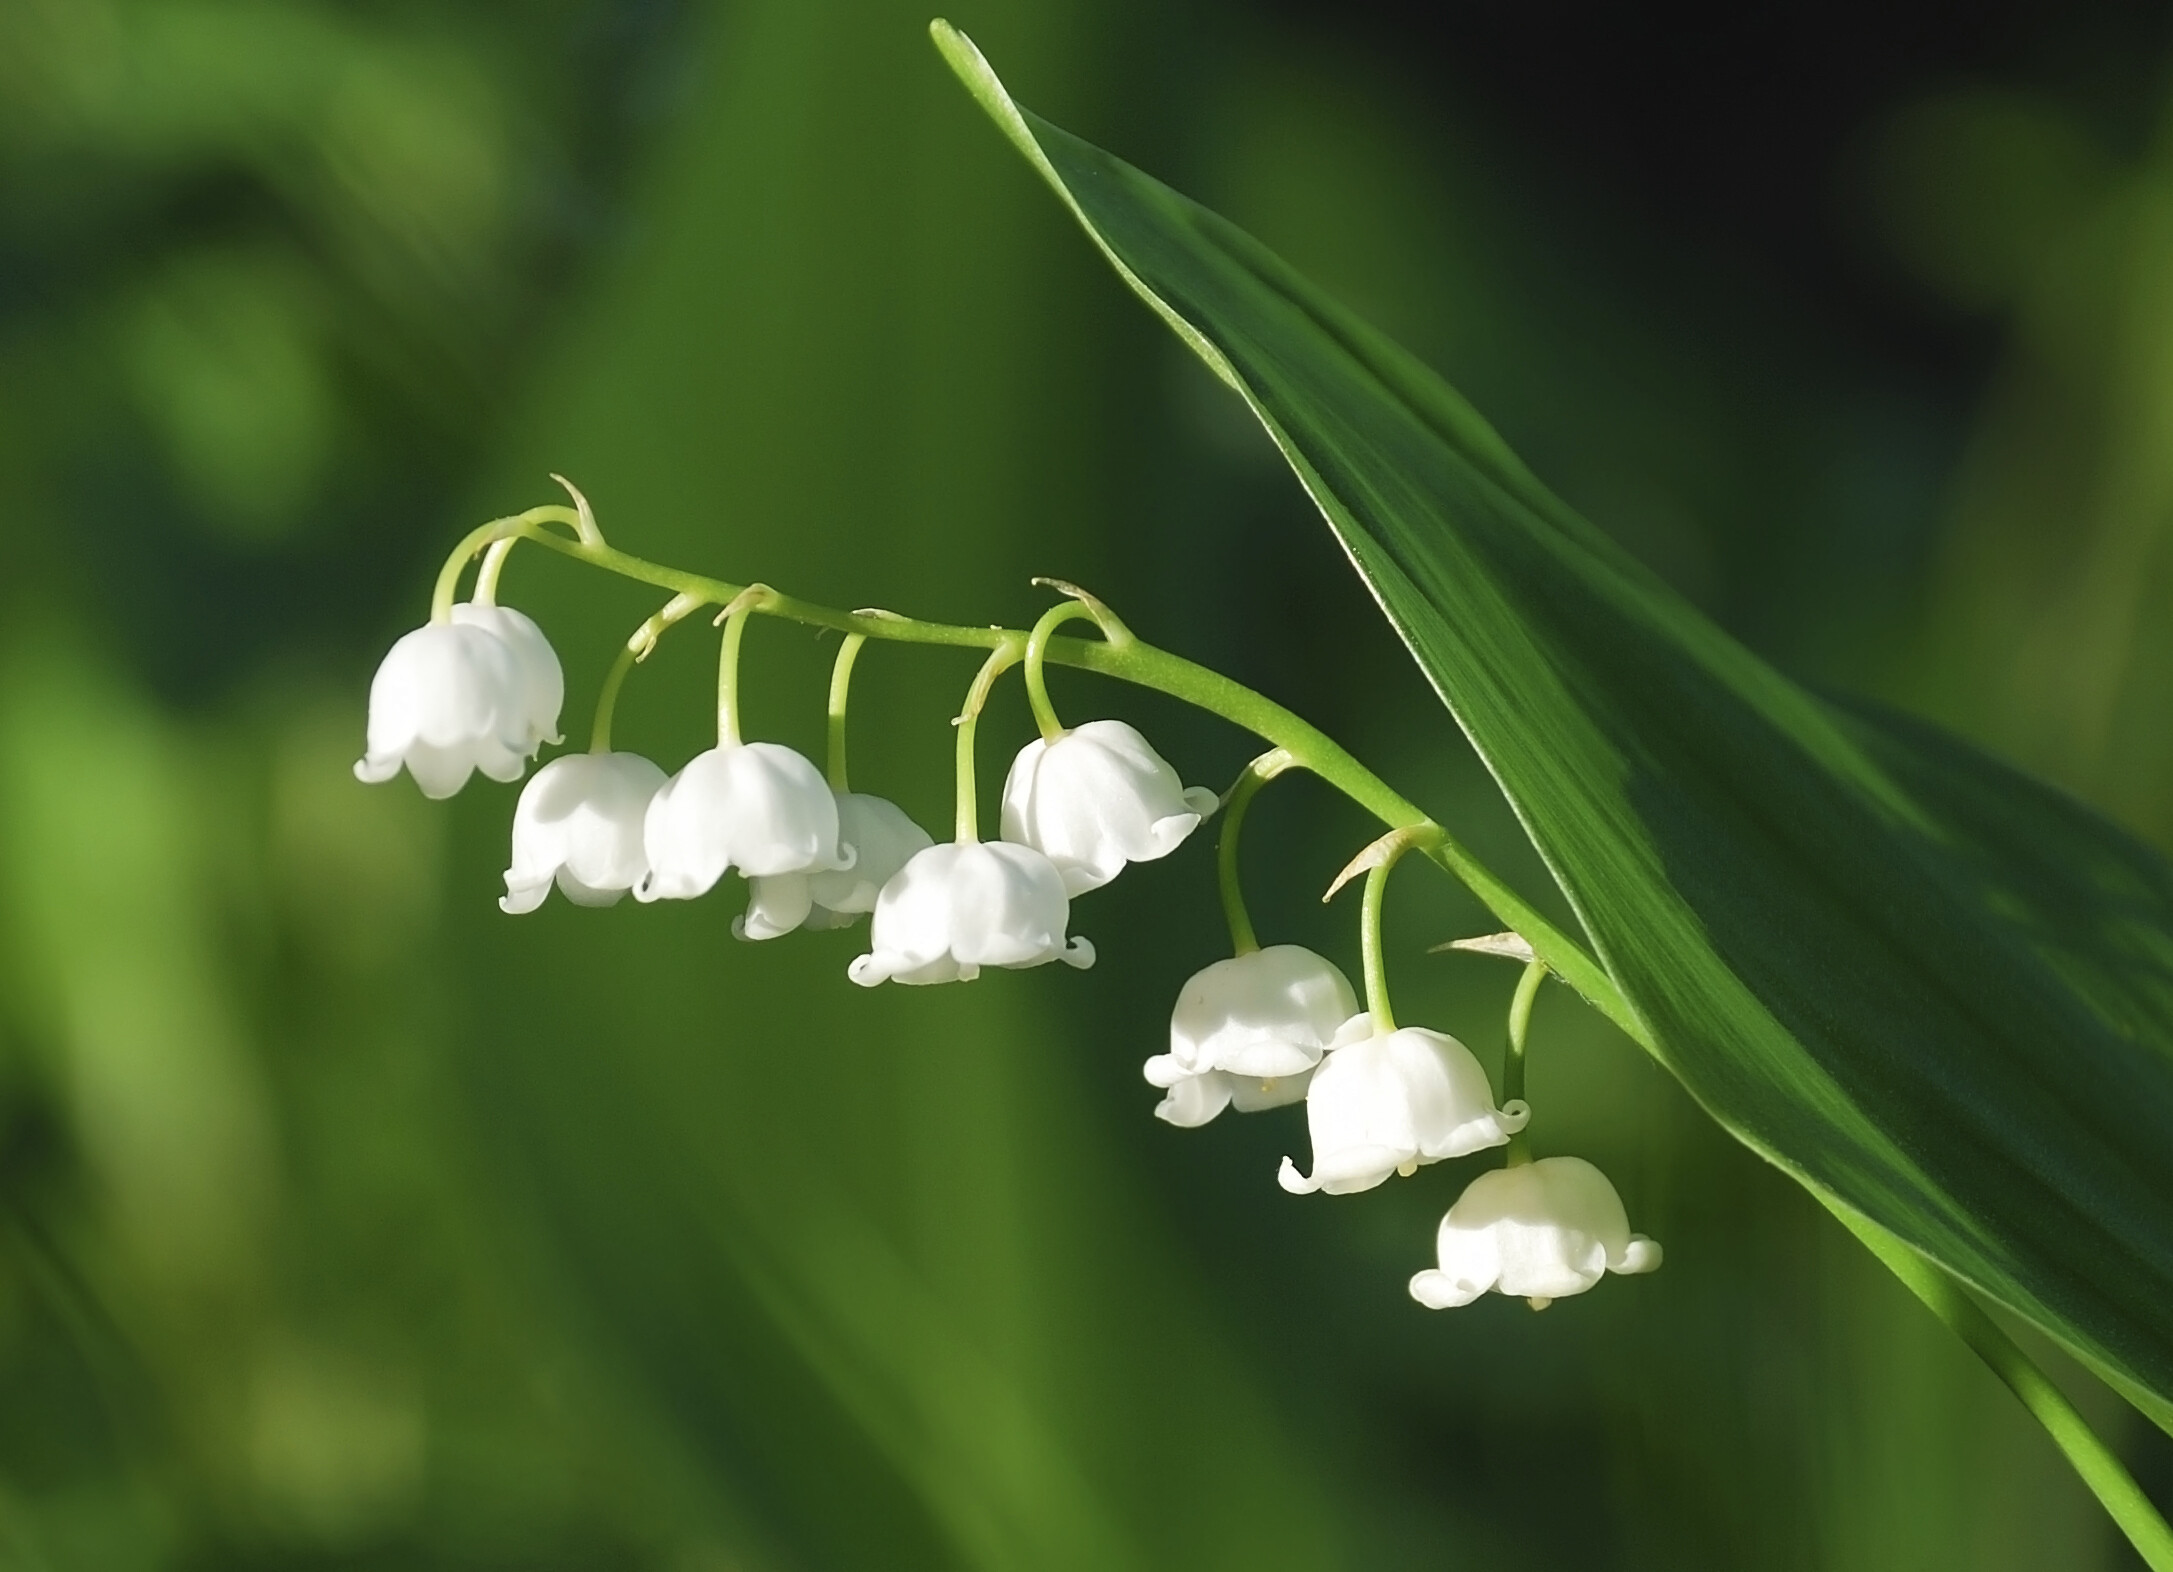 Lily of the Valley: Petite, fragrant, white flowers rise on long stems from the leaf clumps in spring, and orange-red berries appear later in the fall if different varieties are planted for cross-pollination. 2180x1580 HD Background.